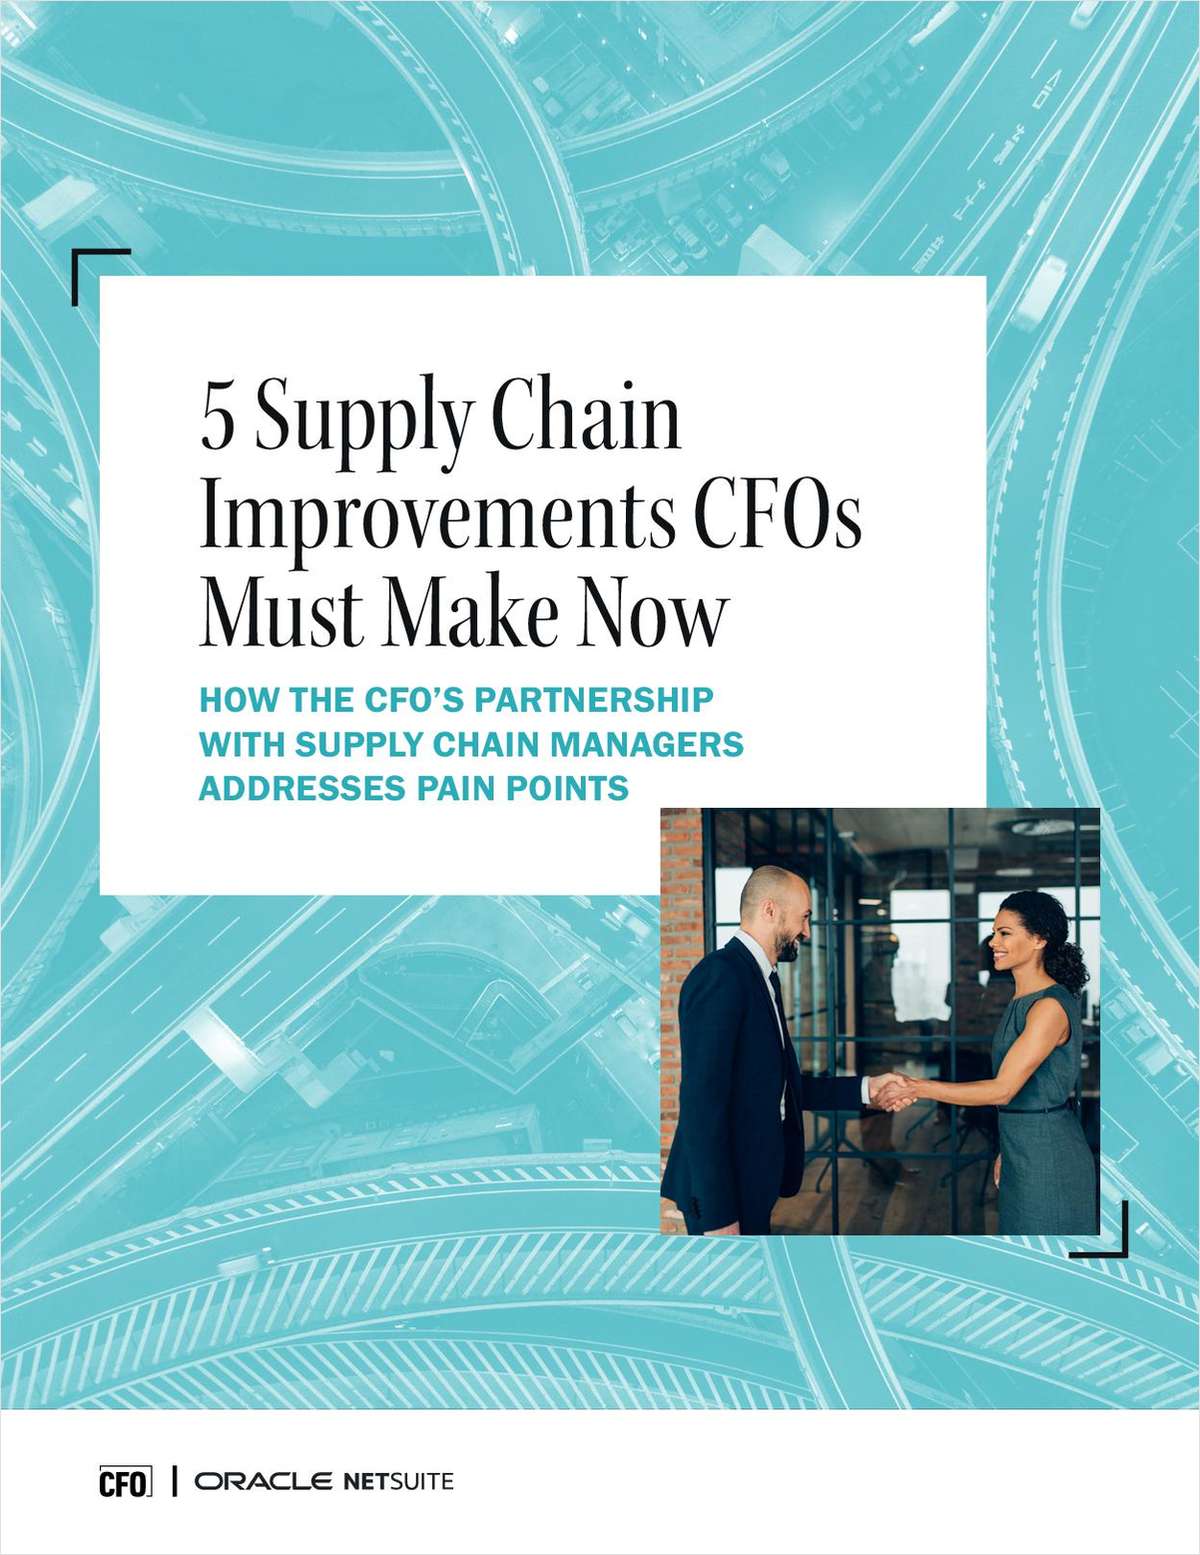 How CFOs Can Address Supply Chain Pain Points